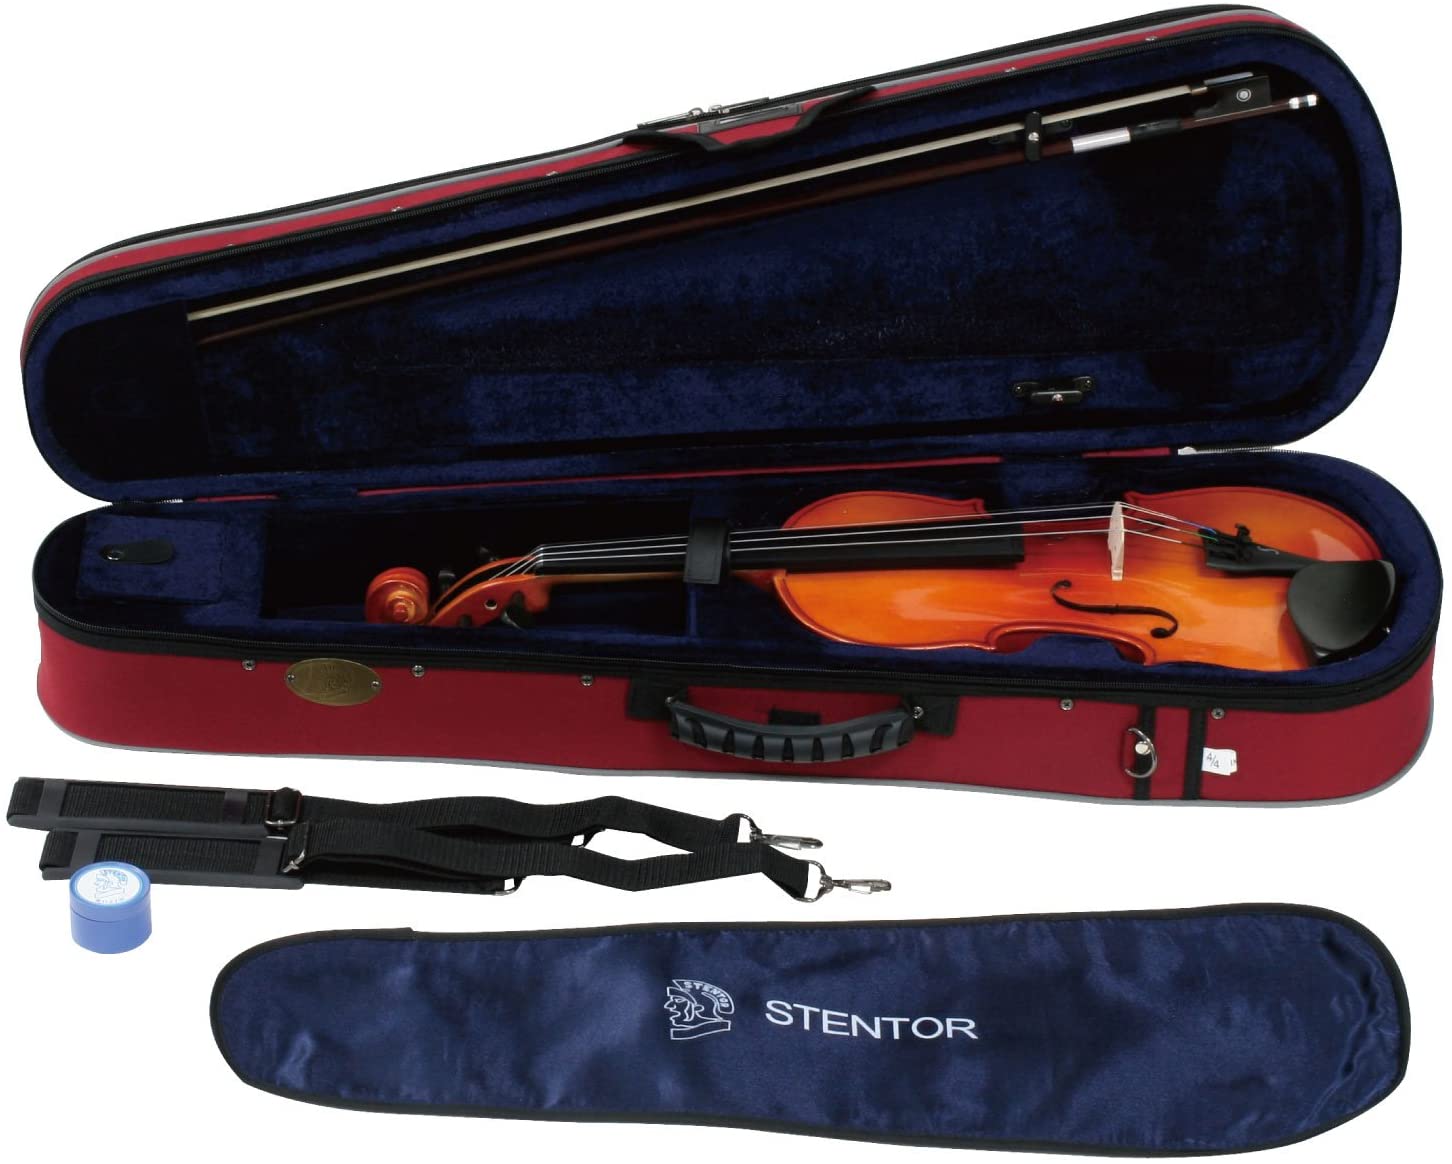 Read more about the article Stentor 1500- The Best Violin for Beginners